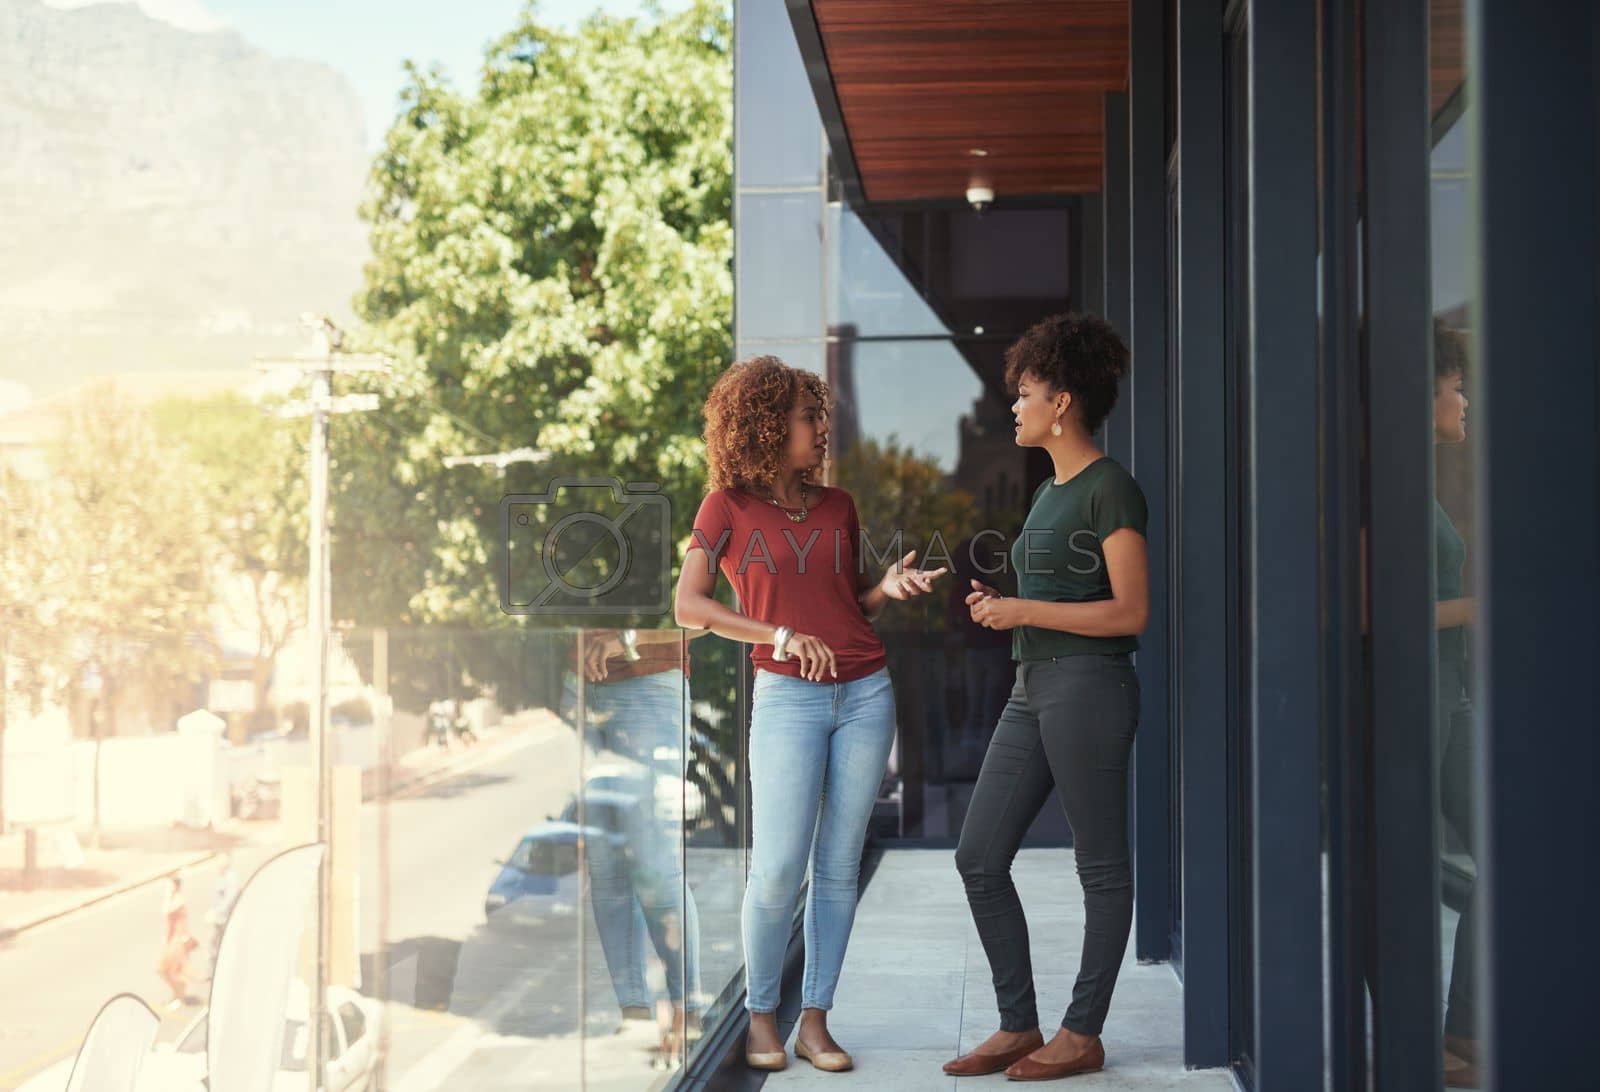 Royalty free image of Communication in the workplace is important. two businesswomen chatting outside on a balcony. by YuriArcurs